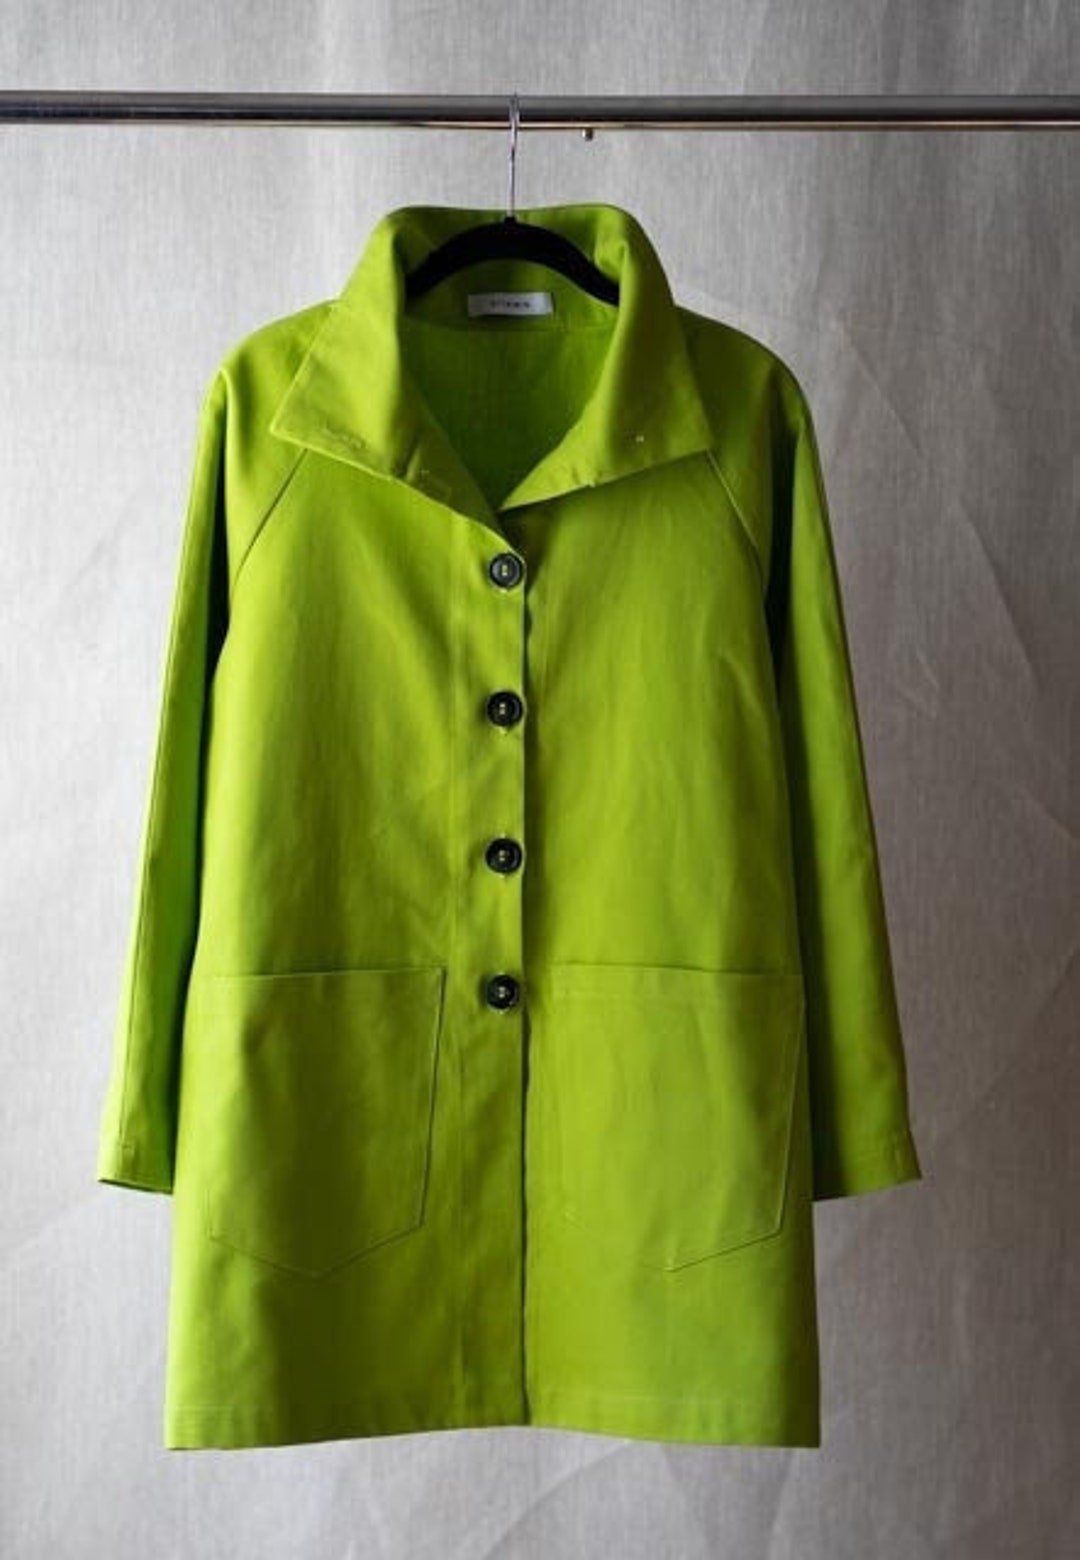 Classic Vitamin Jacket in a Brilliant Lime Green Green Coat - Etsy